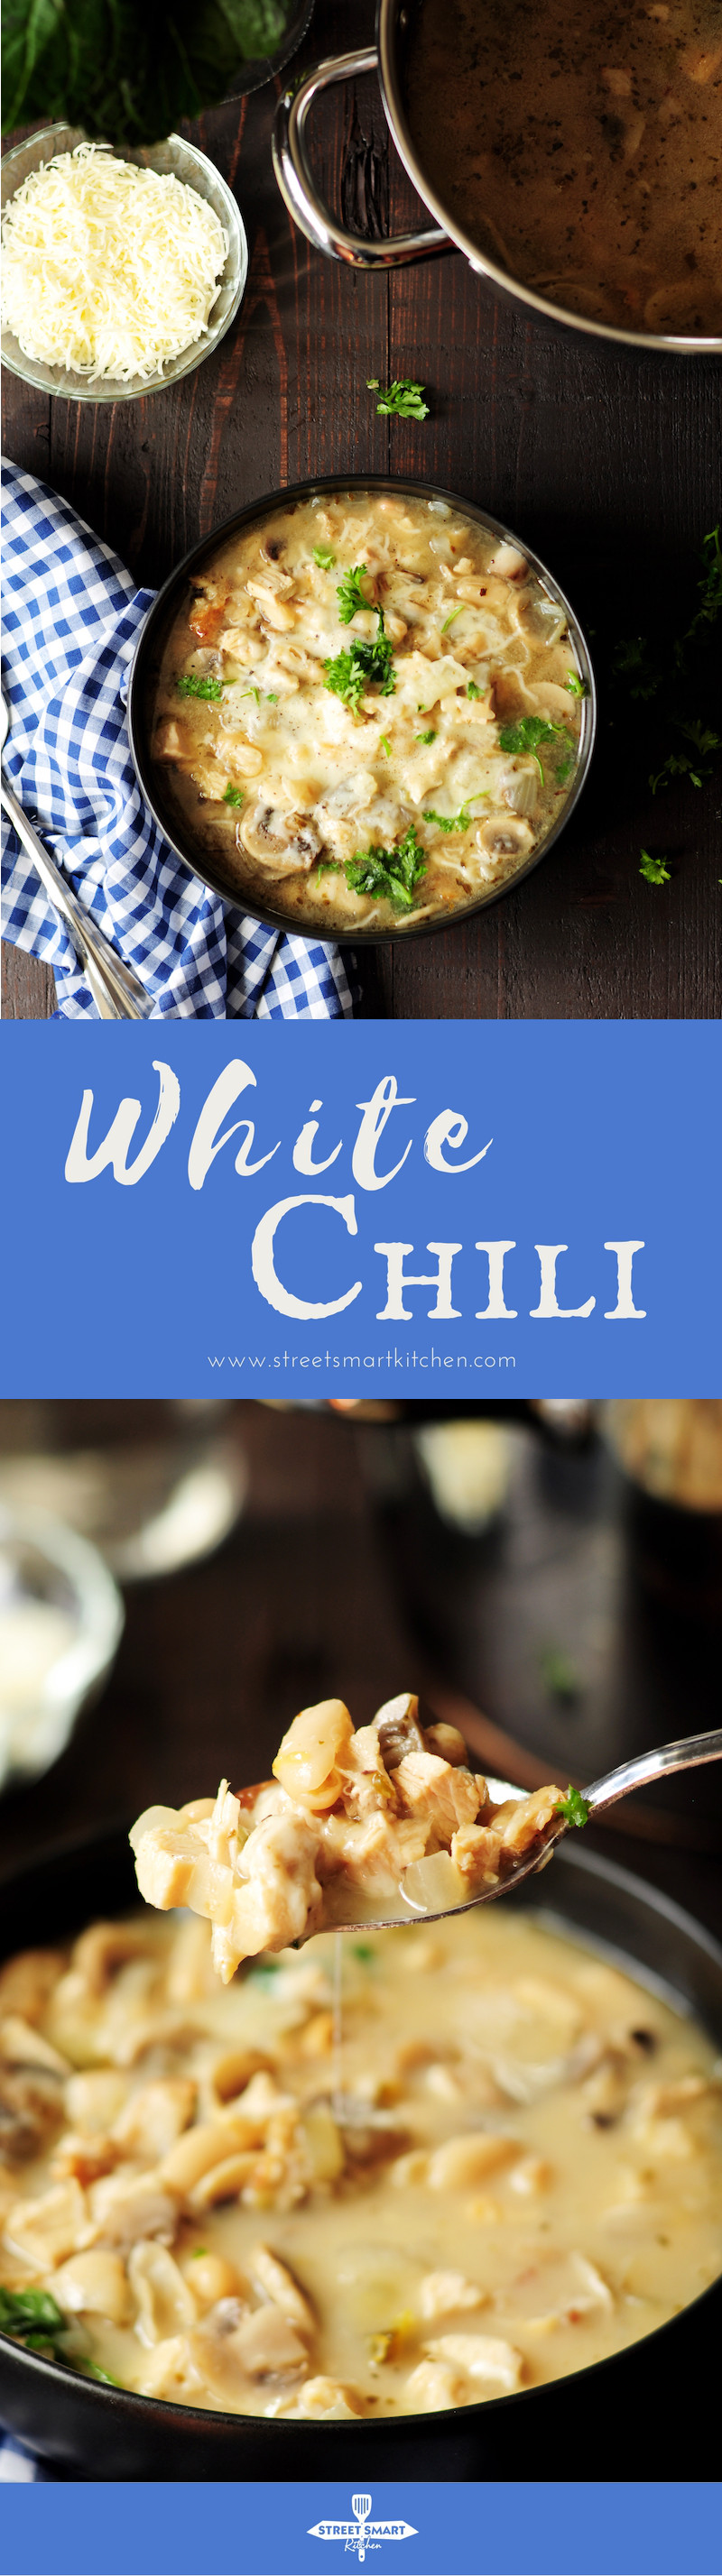 This white chili recipe offers a different take on dark versions of chili. While still giving you a hearty meal, it provides a healthy choice with a lighter color, flavor, and consistency.